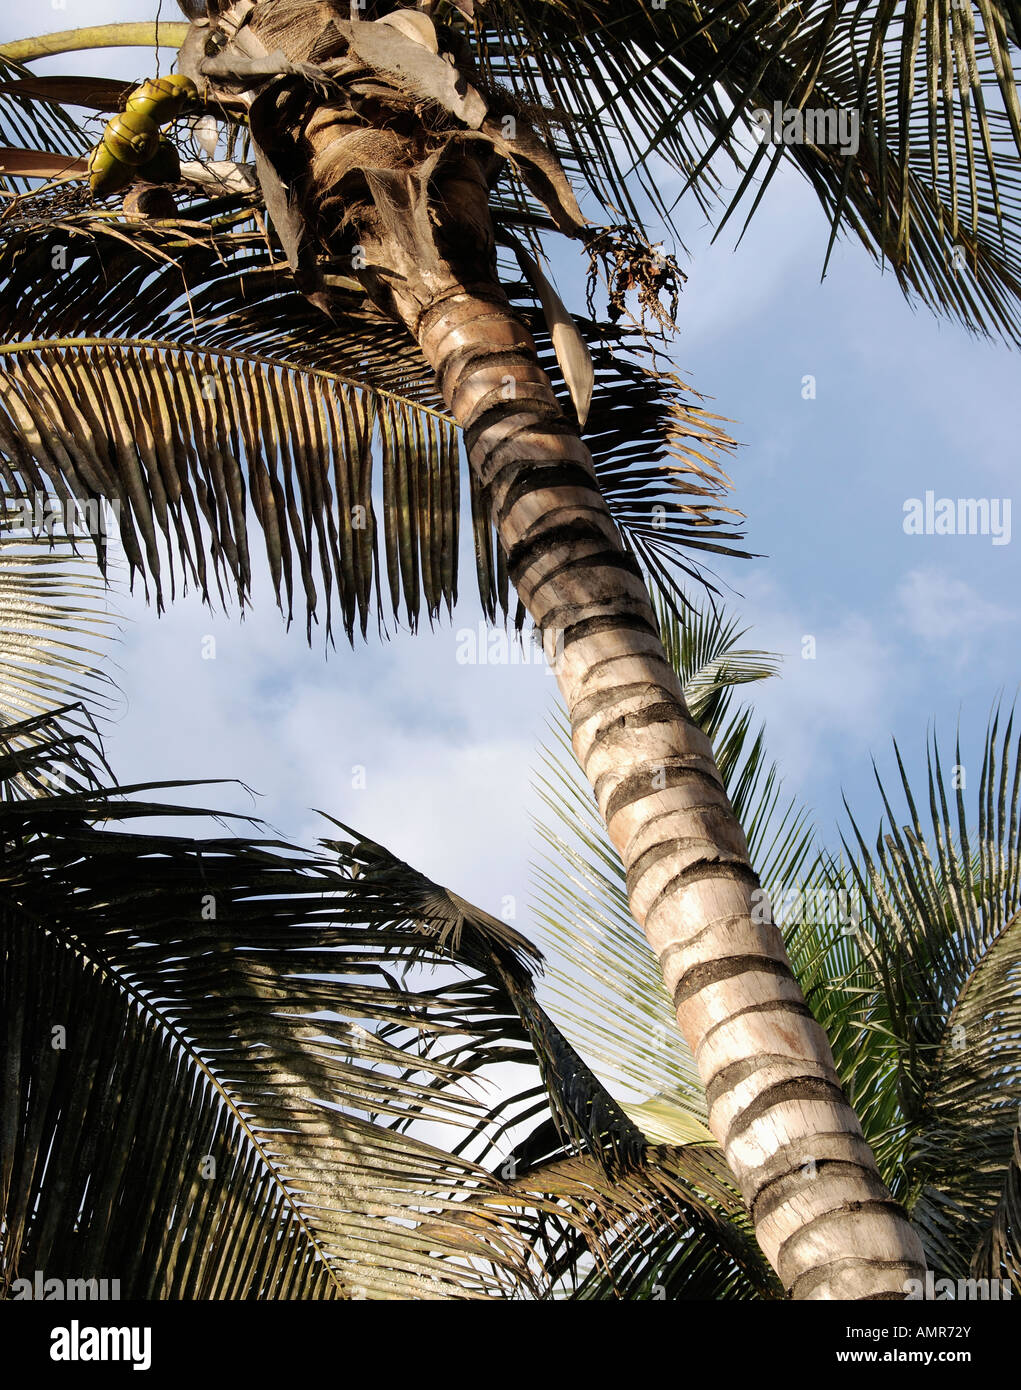 Closeup of a single palm tree trunk and leaves against a blue cloudy sky Stock Photo